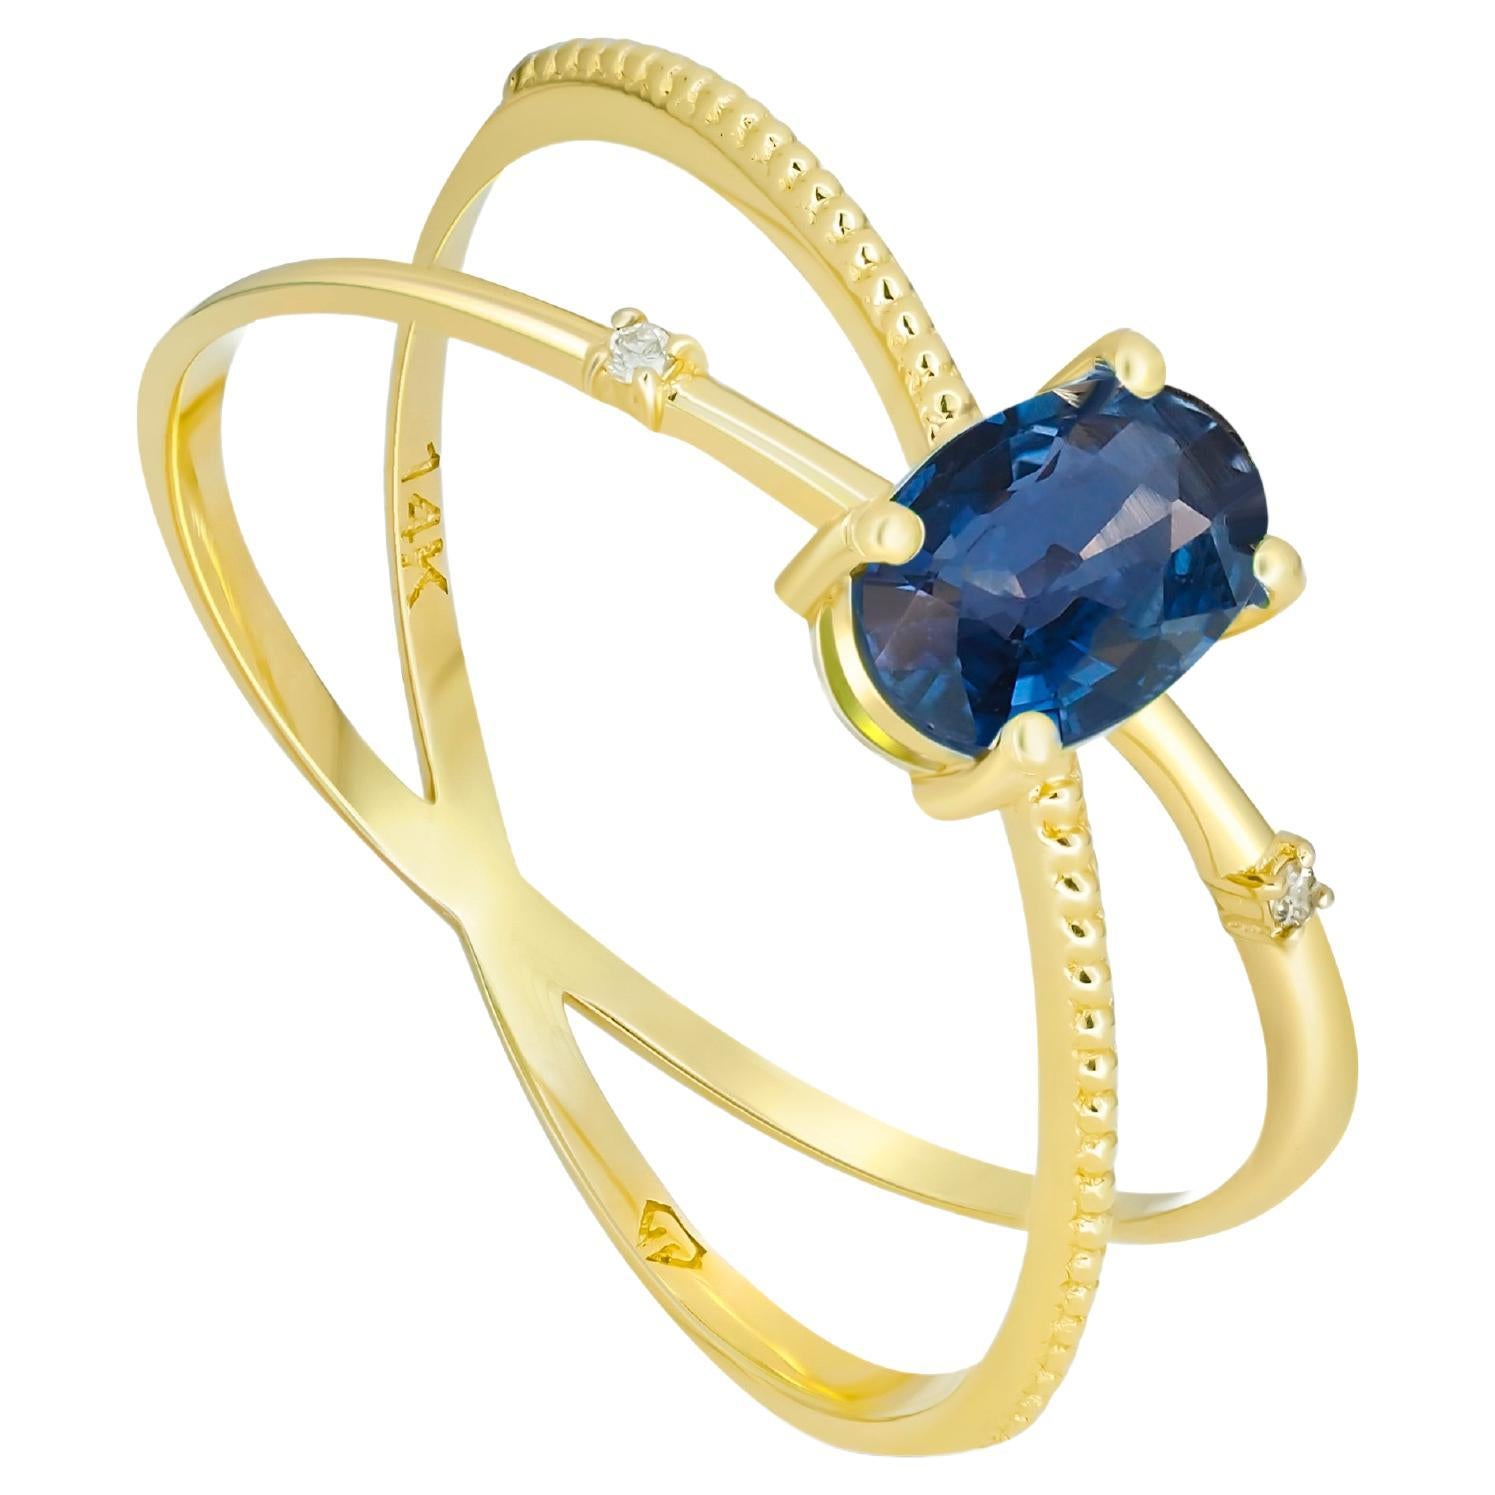  Gold Ring with Sapphire and Diamonds. Blue sapphire ring.!